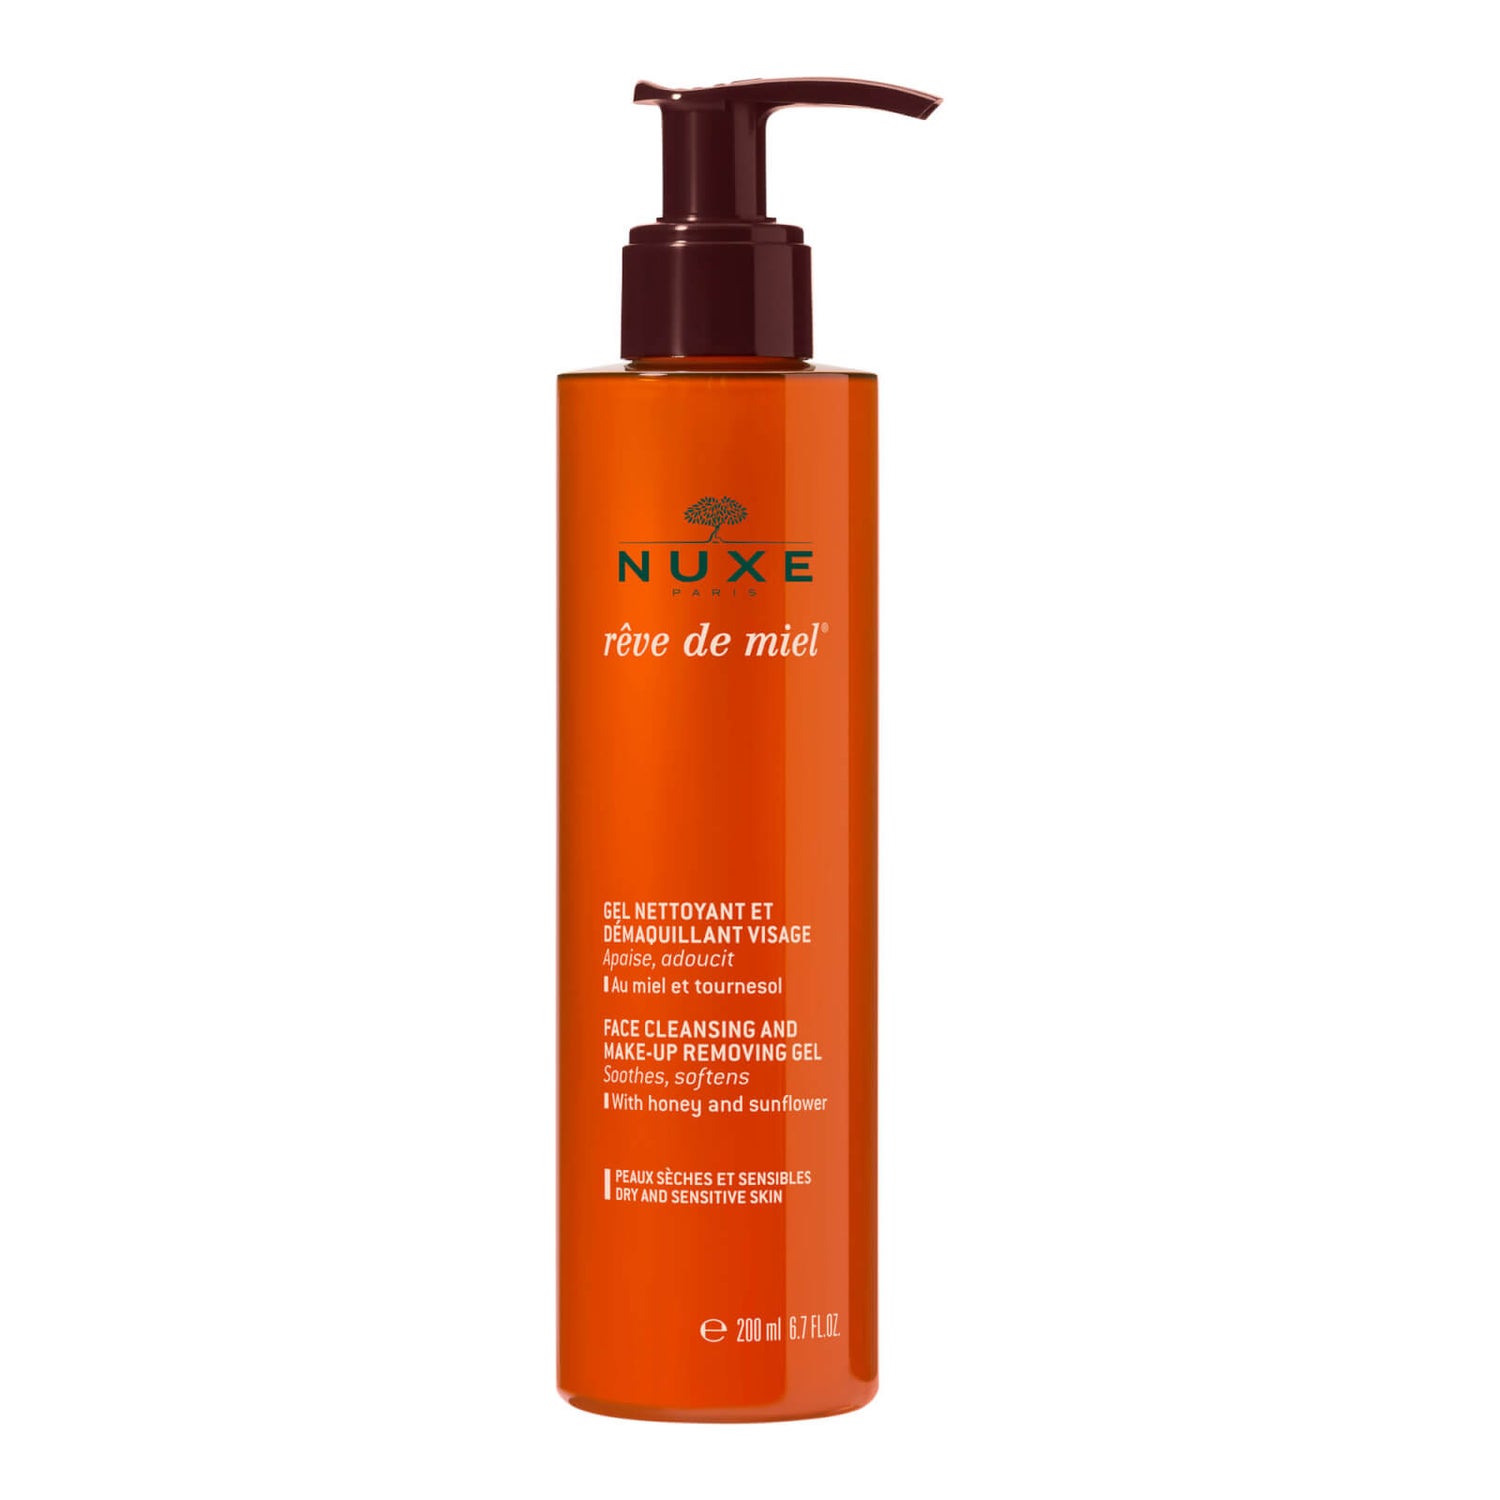 NUXE Rêve de Miel Face Cleansing and Makeup Removing Gel 200ml